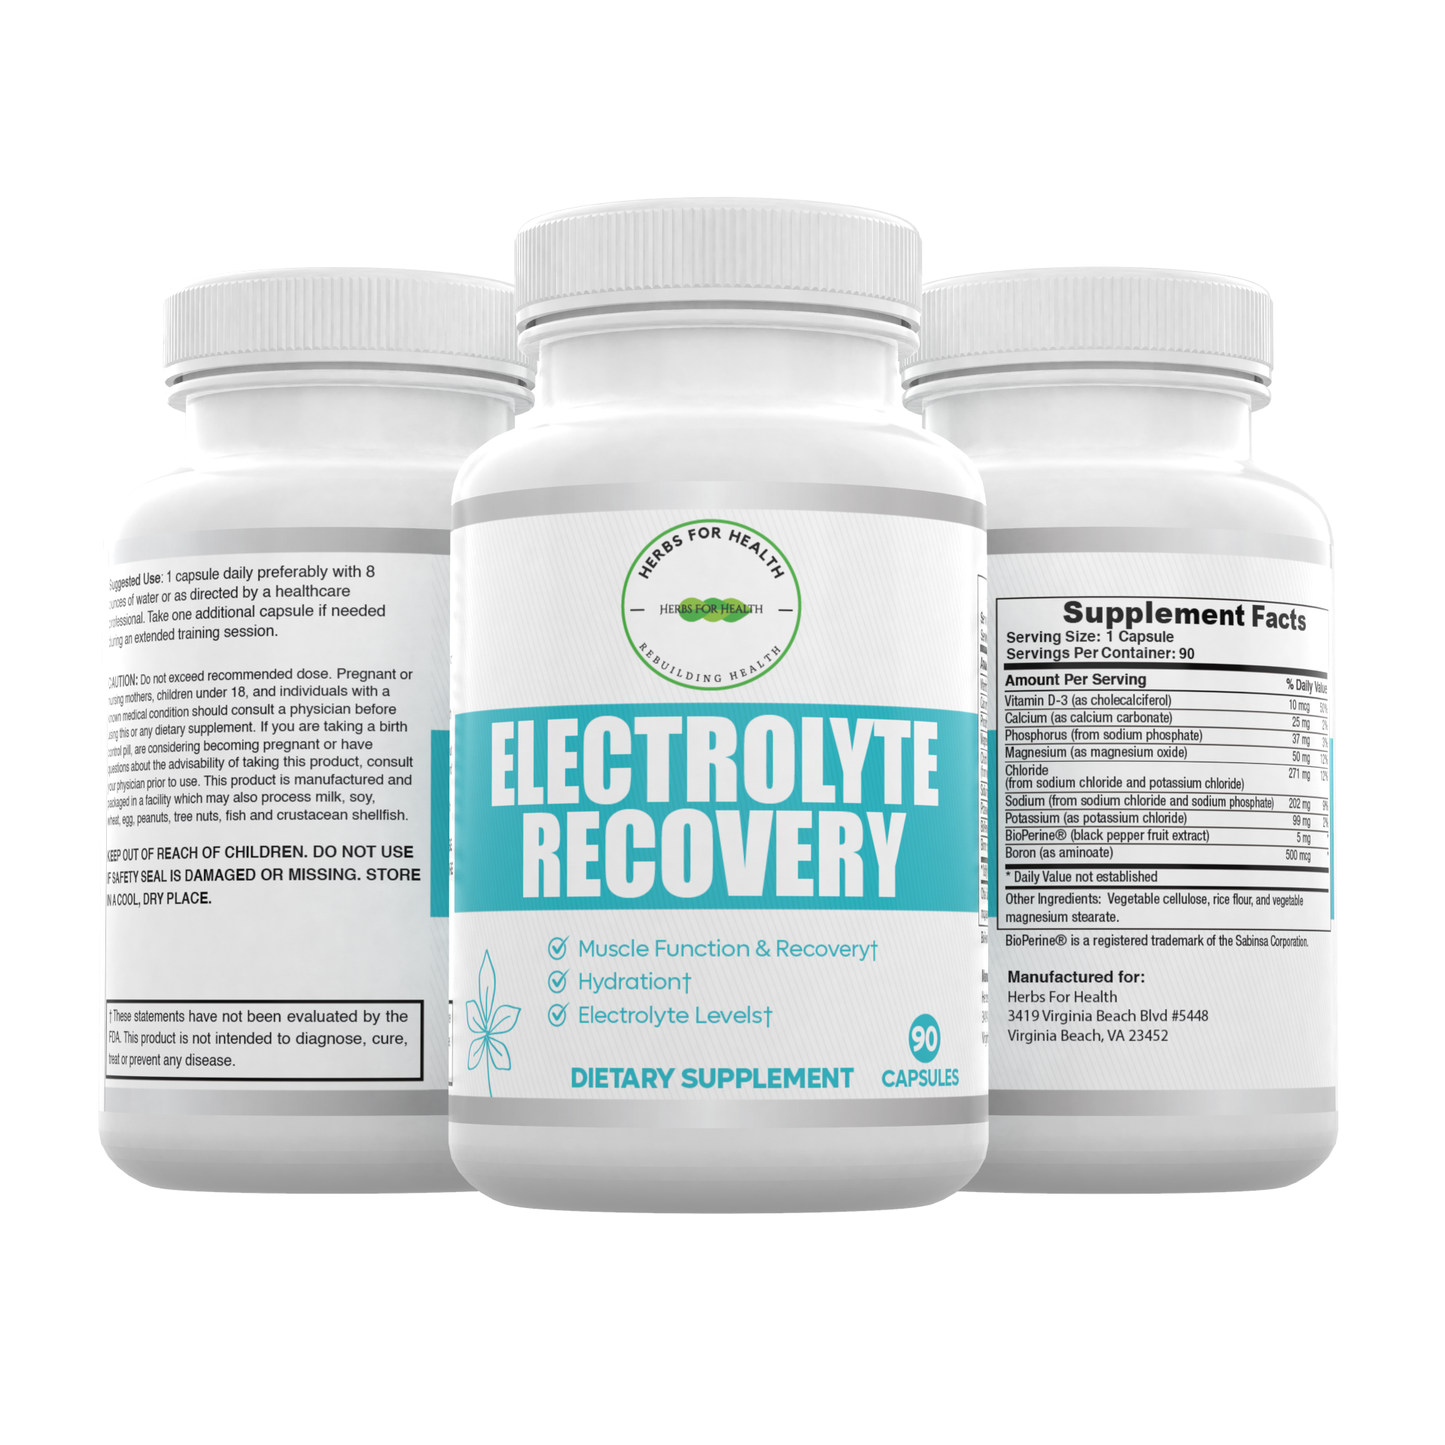 Electrolyte Recovery - Herbs For Health